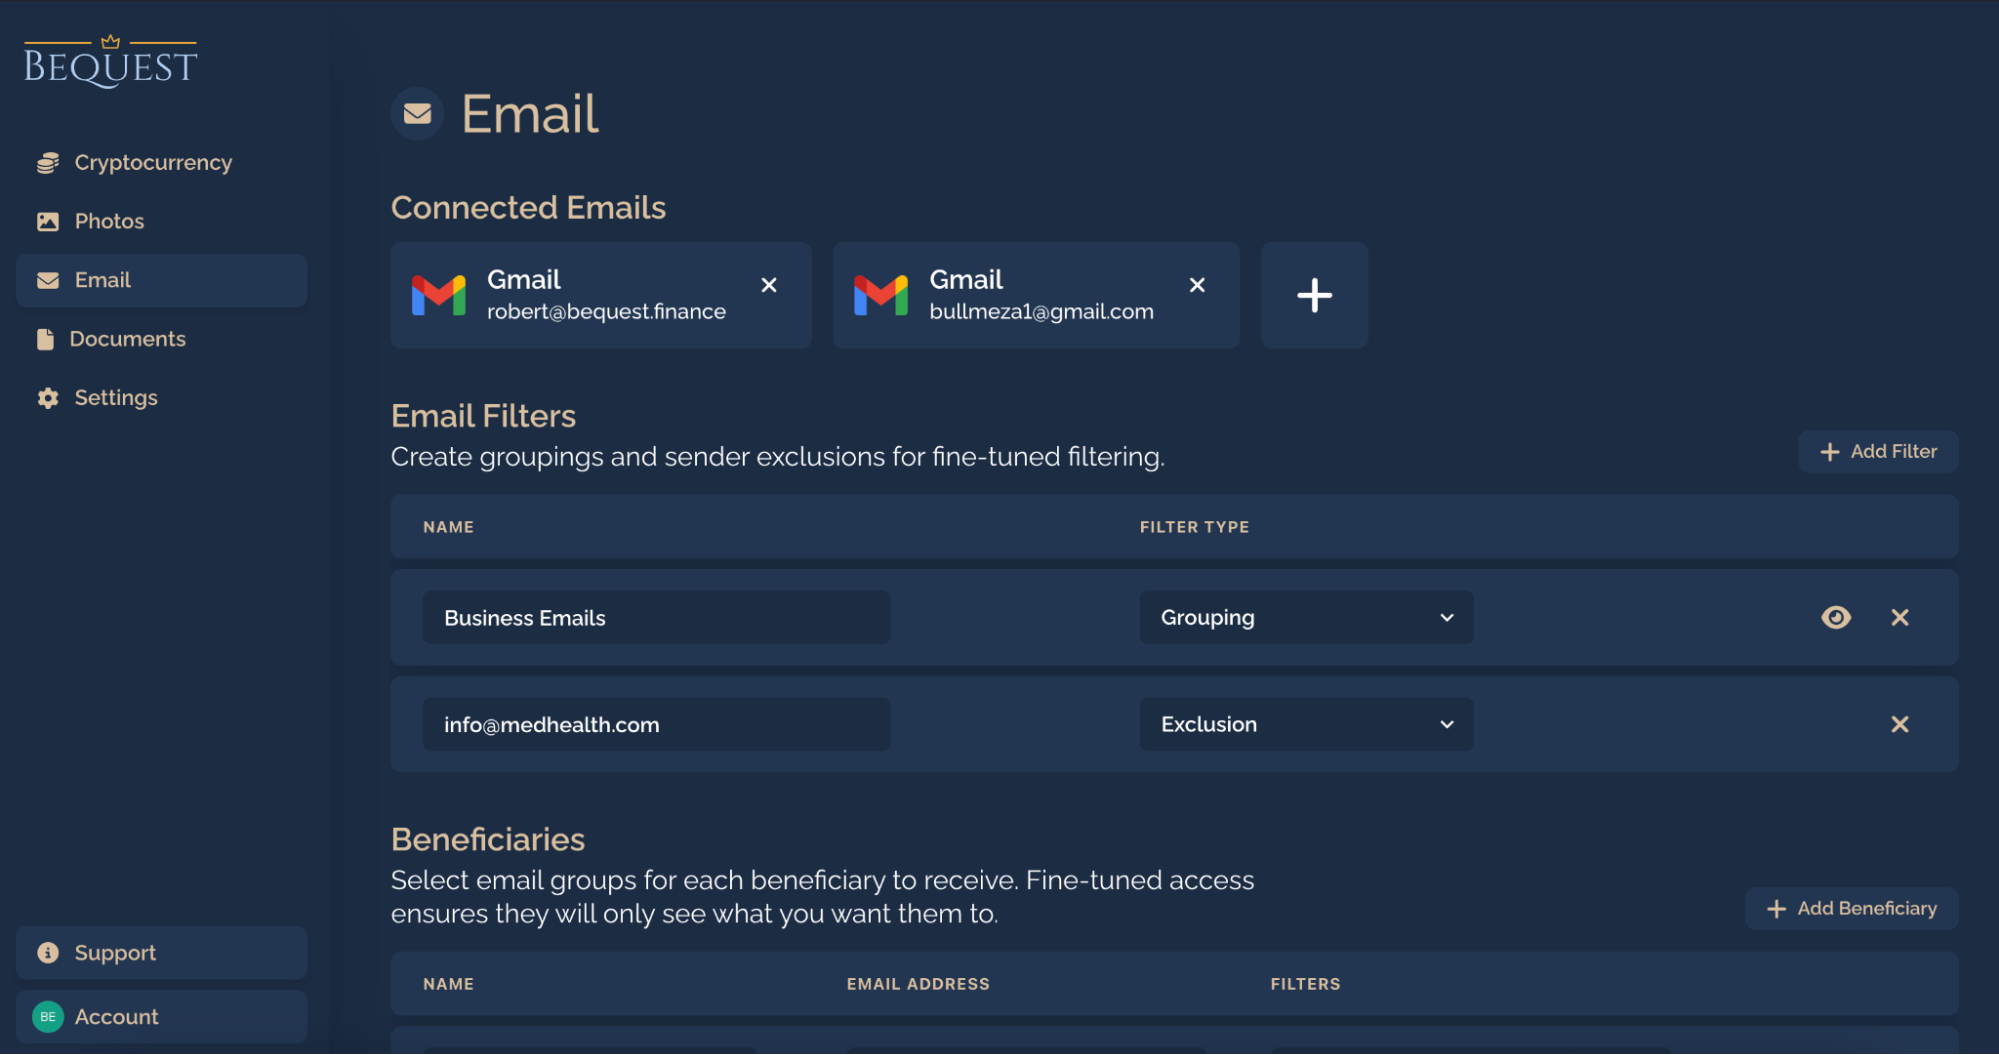 Demo image of Bequest's Email Account Inheritance